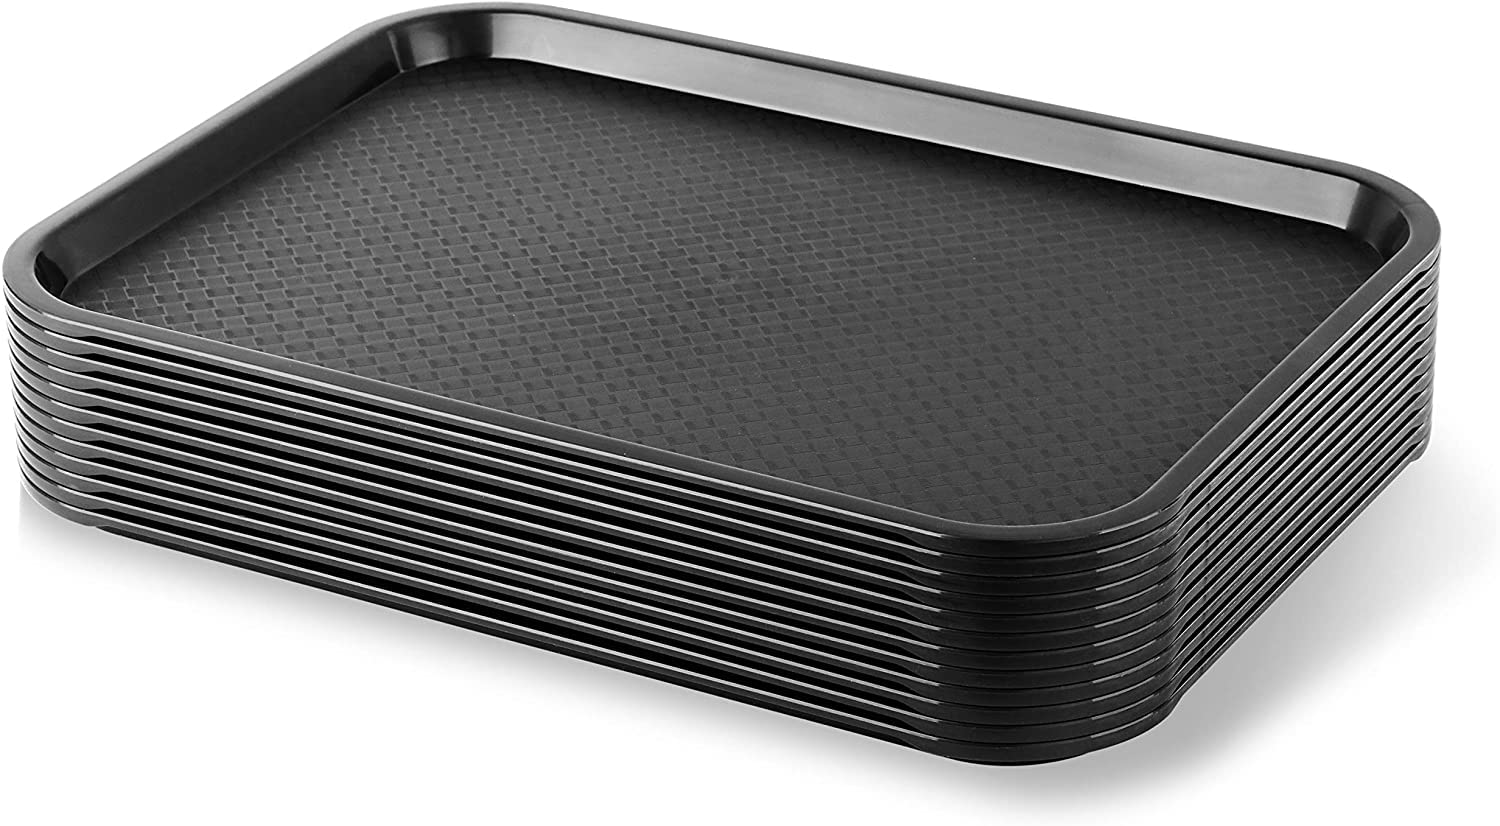 NJ Plastic Serving Platter Large Tray Unbreakable Snacks Tea Serving Tray Black Drink Breakfast Tea Dinner Coffee Salad Food for Dinning Table Home Kitchen (16 X 12 Inches) : 12 Pcs.